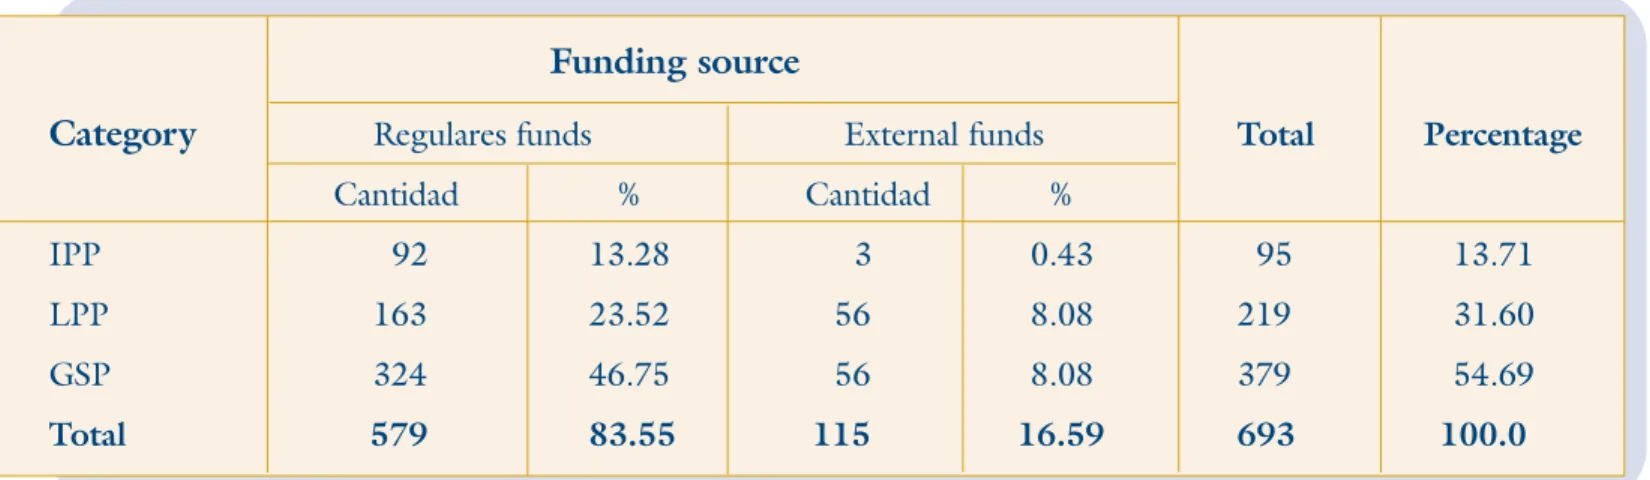 Table 2. Distribution of human resources by category and funding source in 2005.